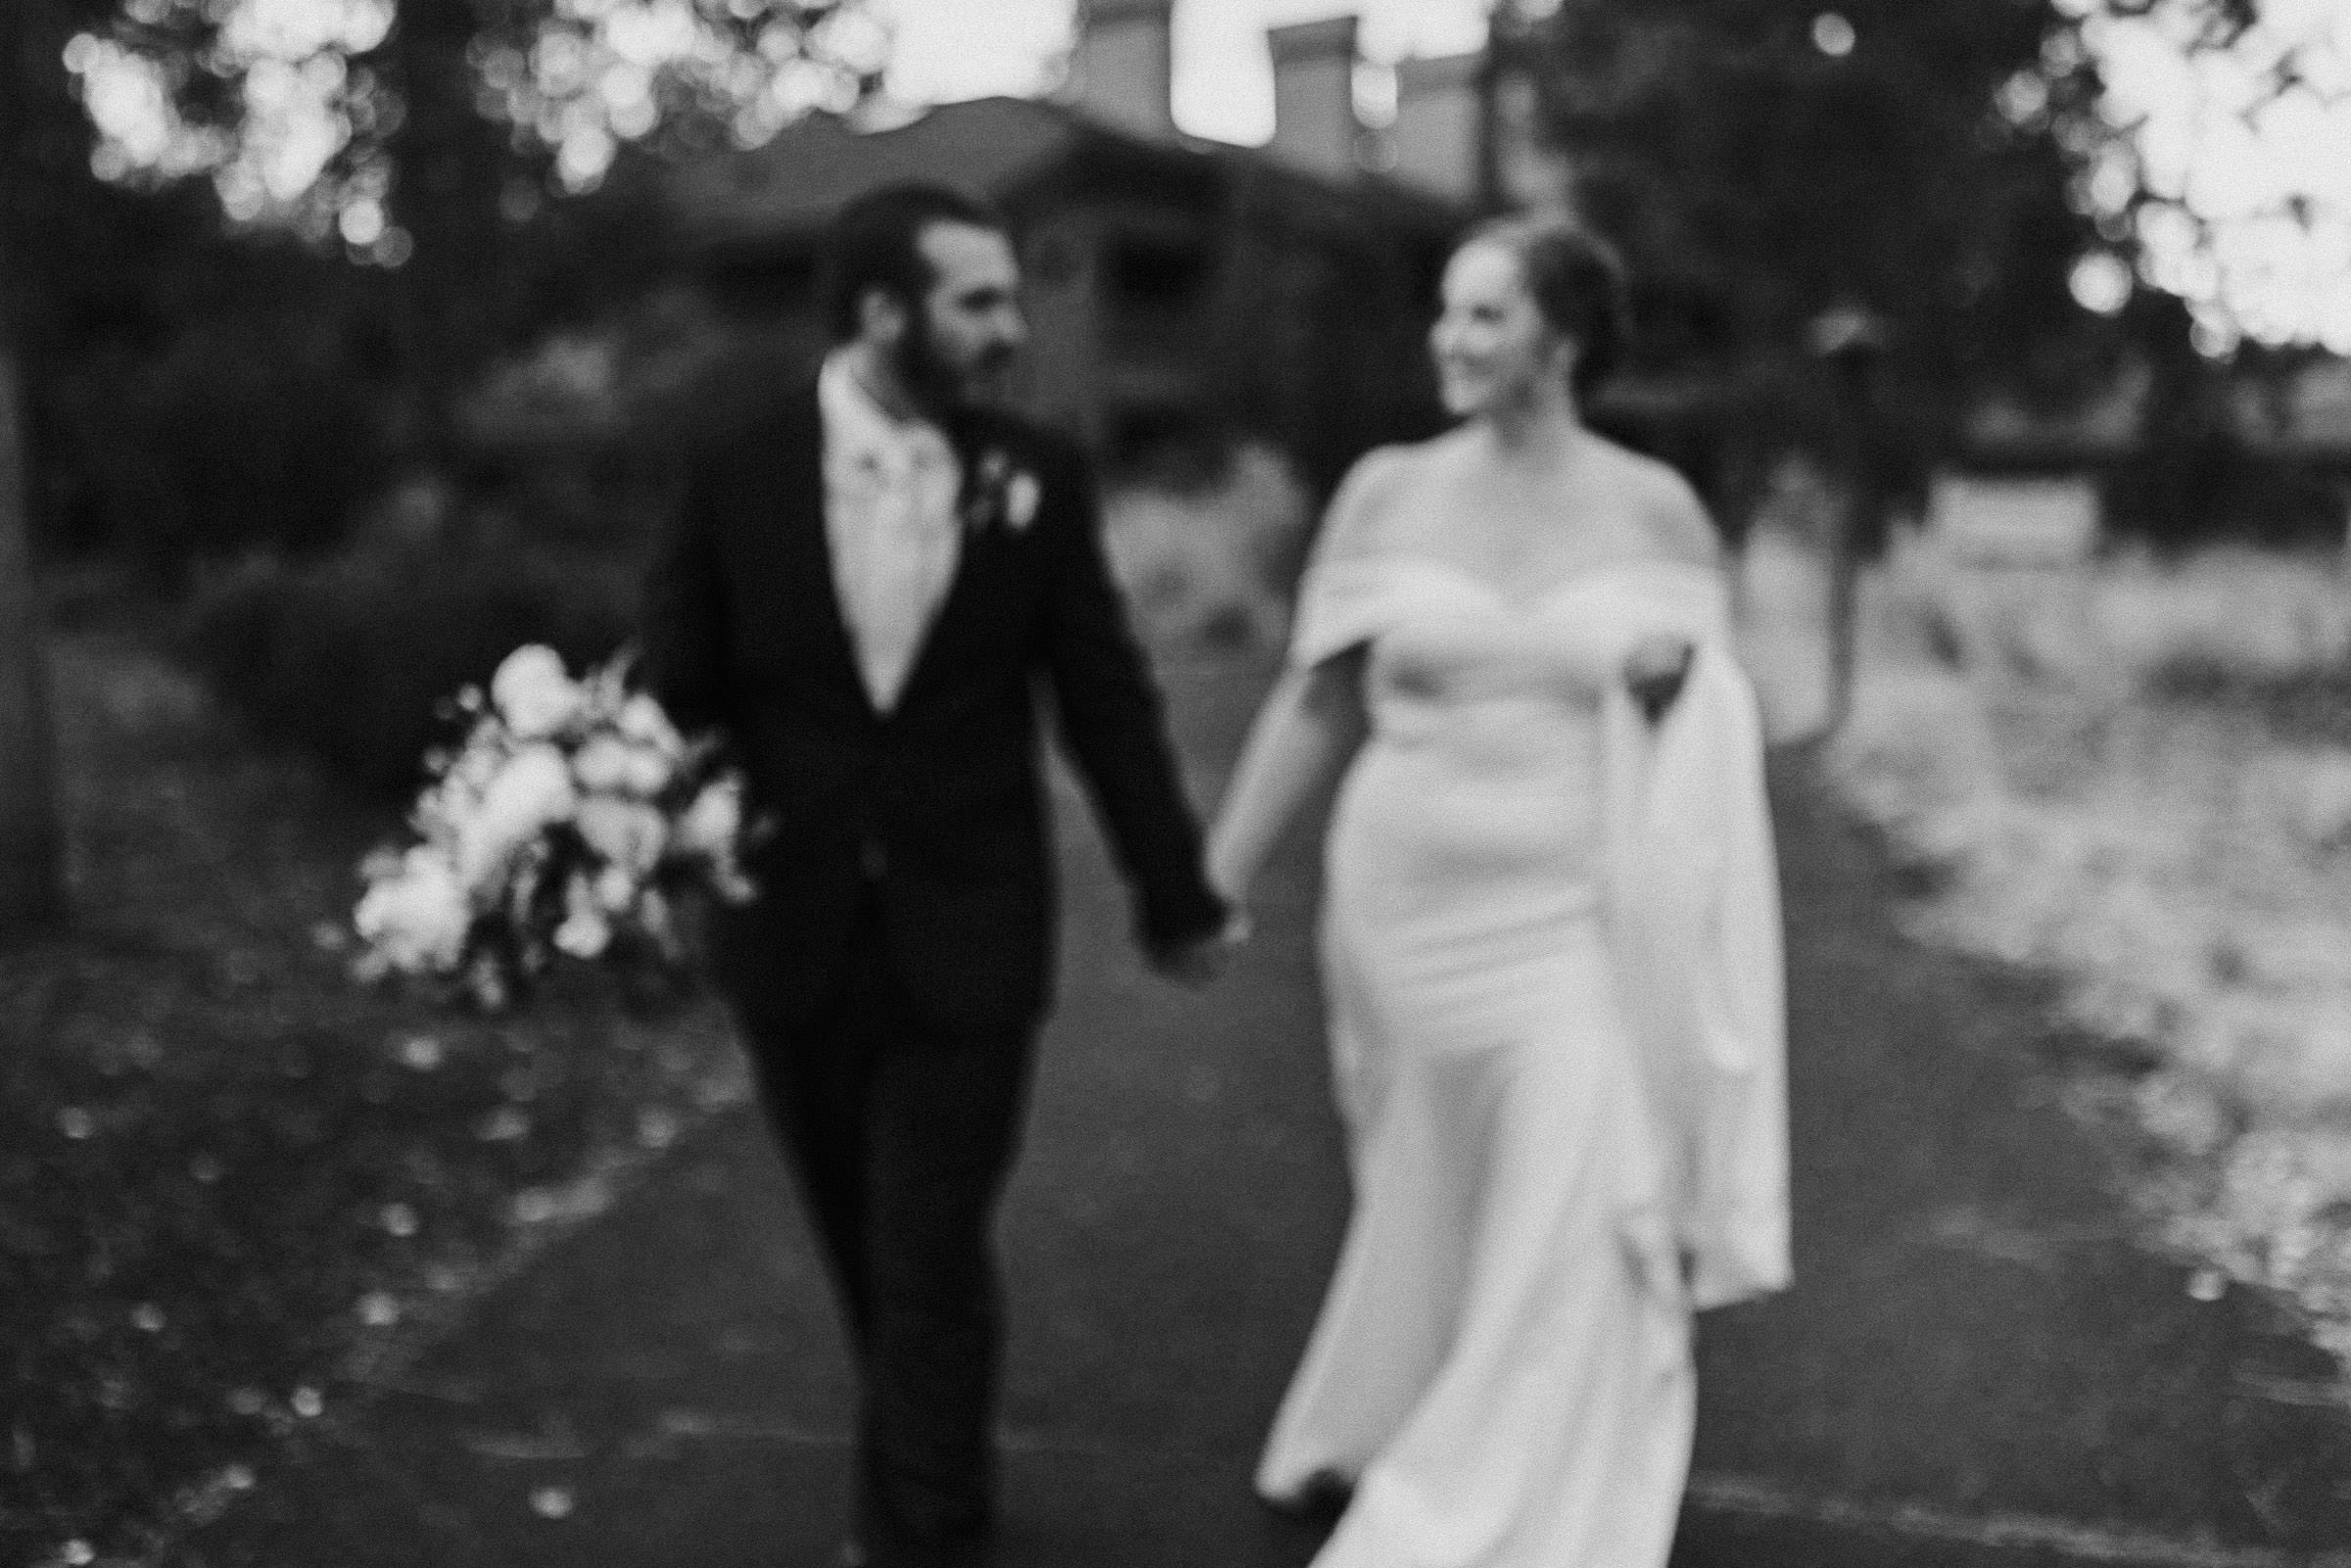 Bride and groom hold hands as they walk down a path